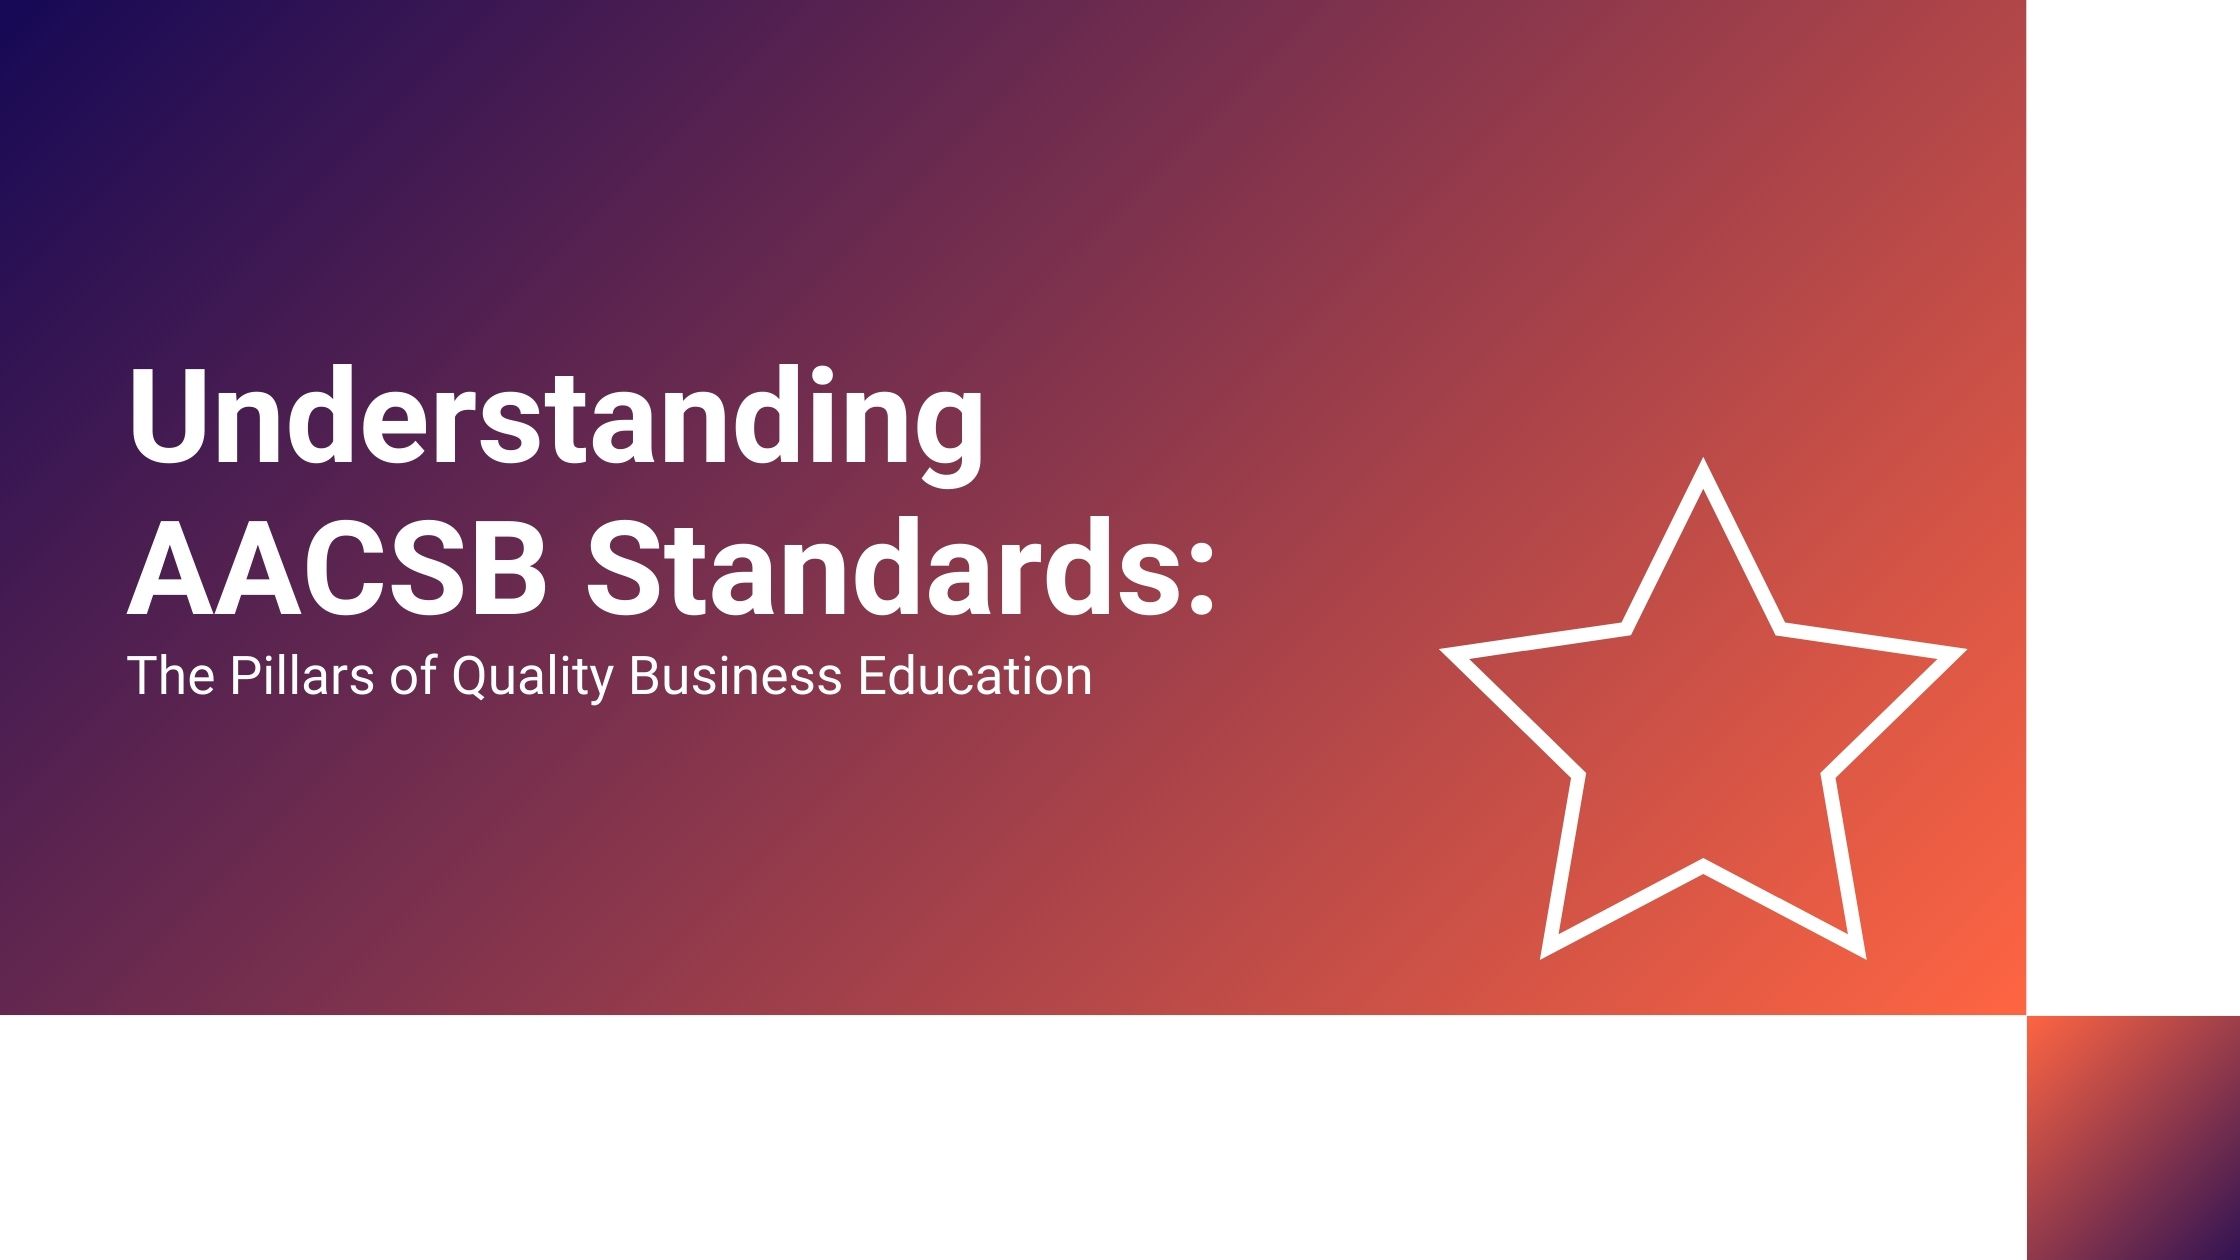 Understanding AACSB Standards: The Pillars of Quality Business Education